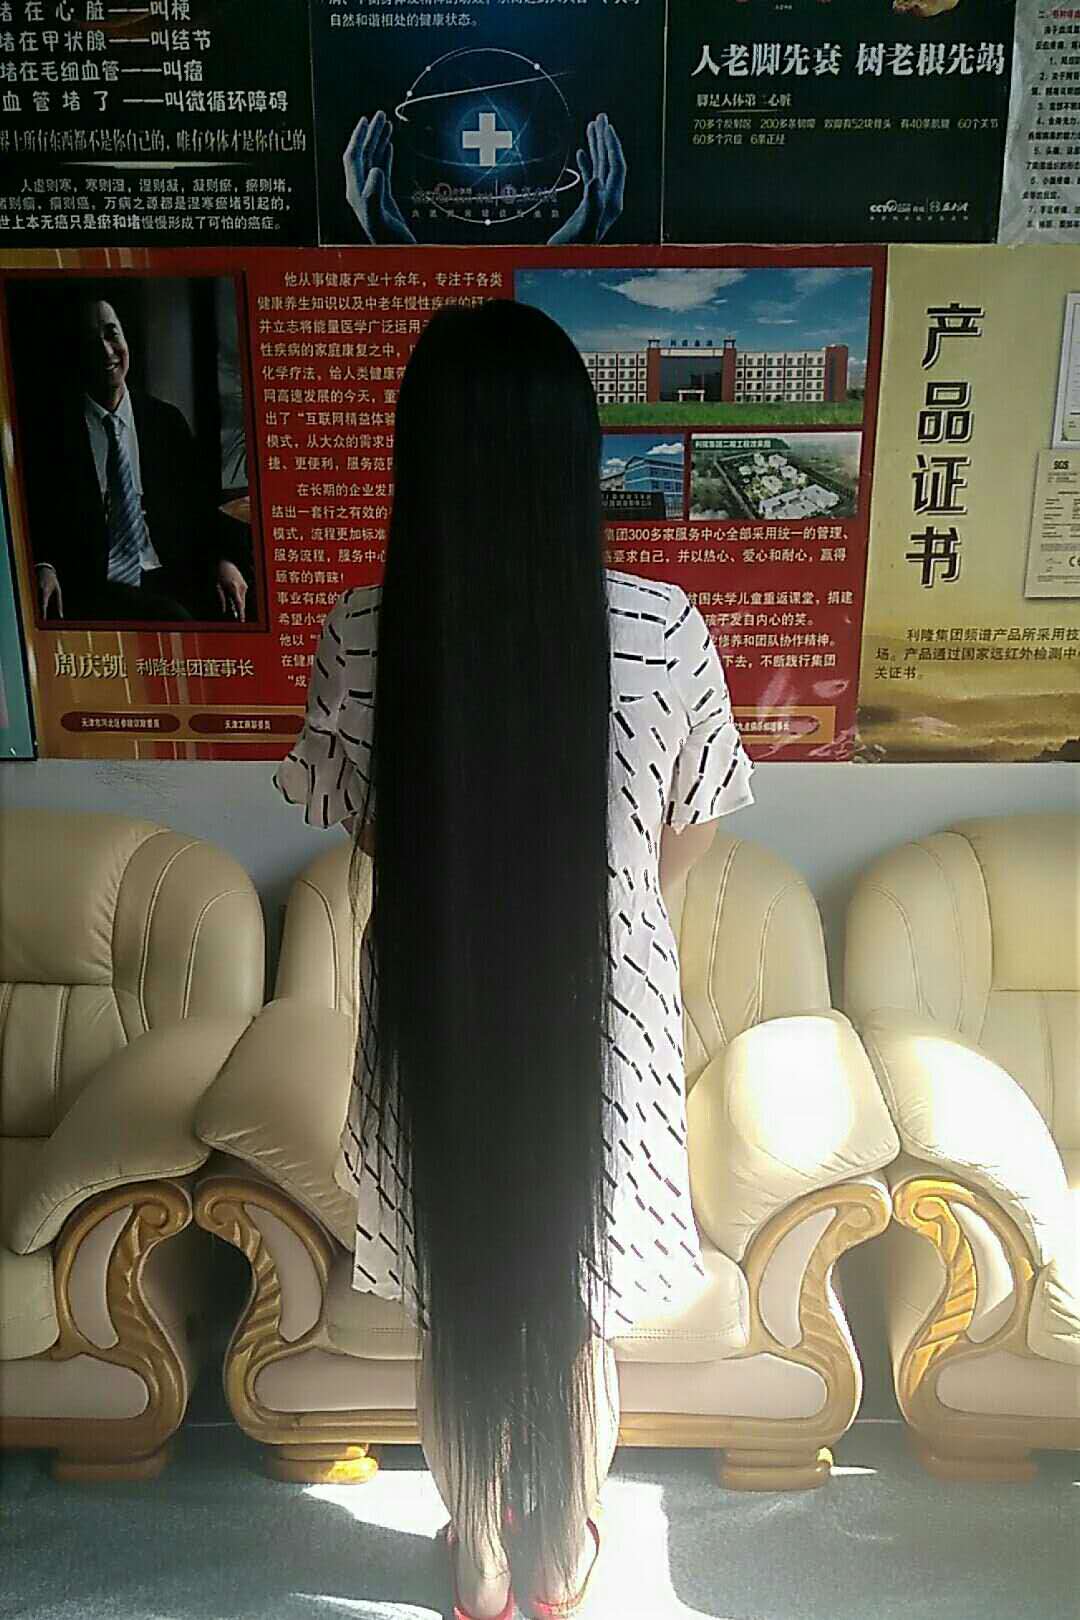 Her super long hair touch sandle